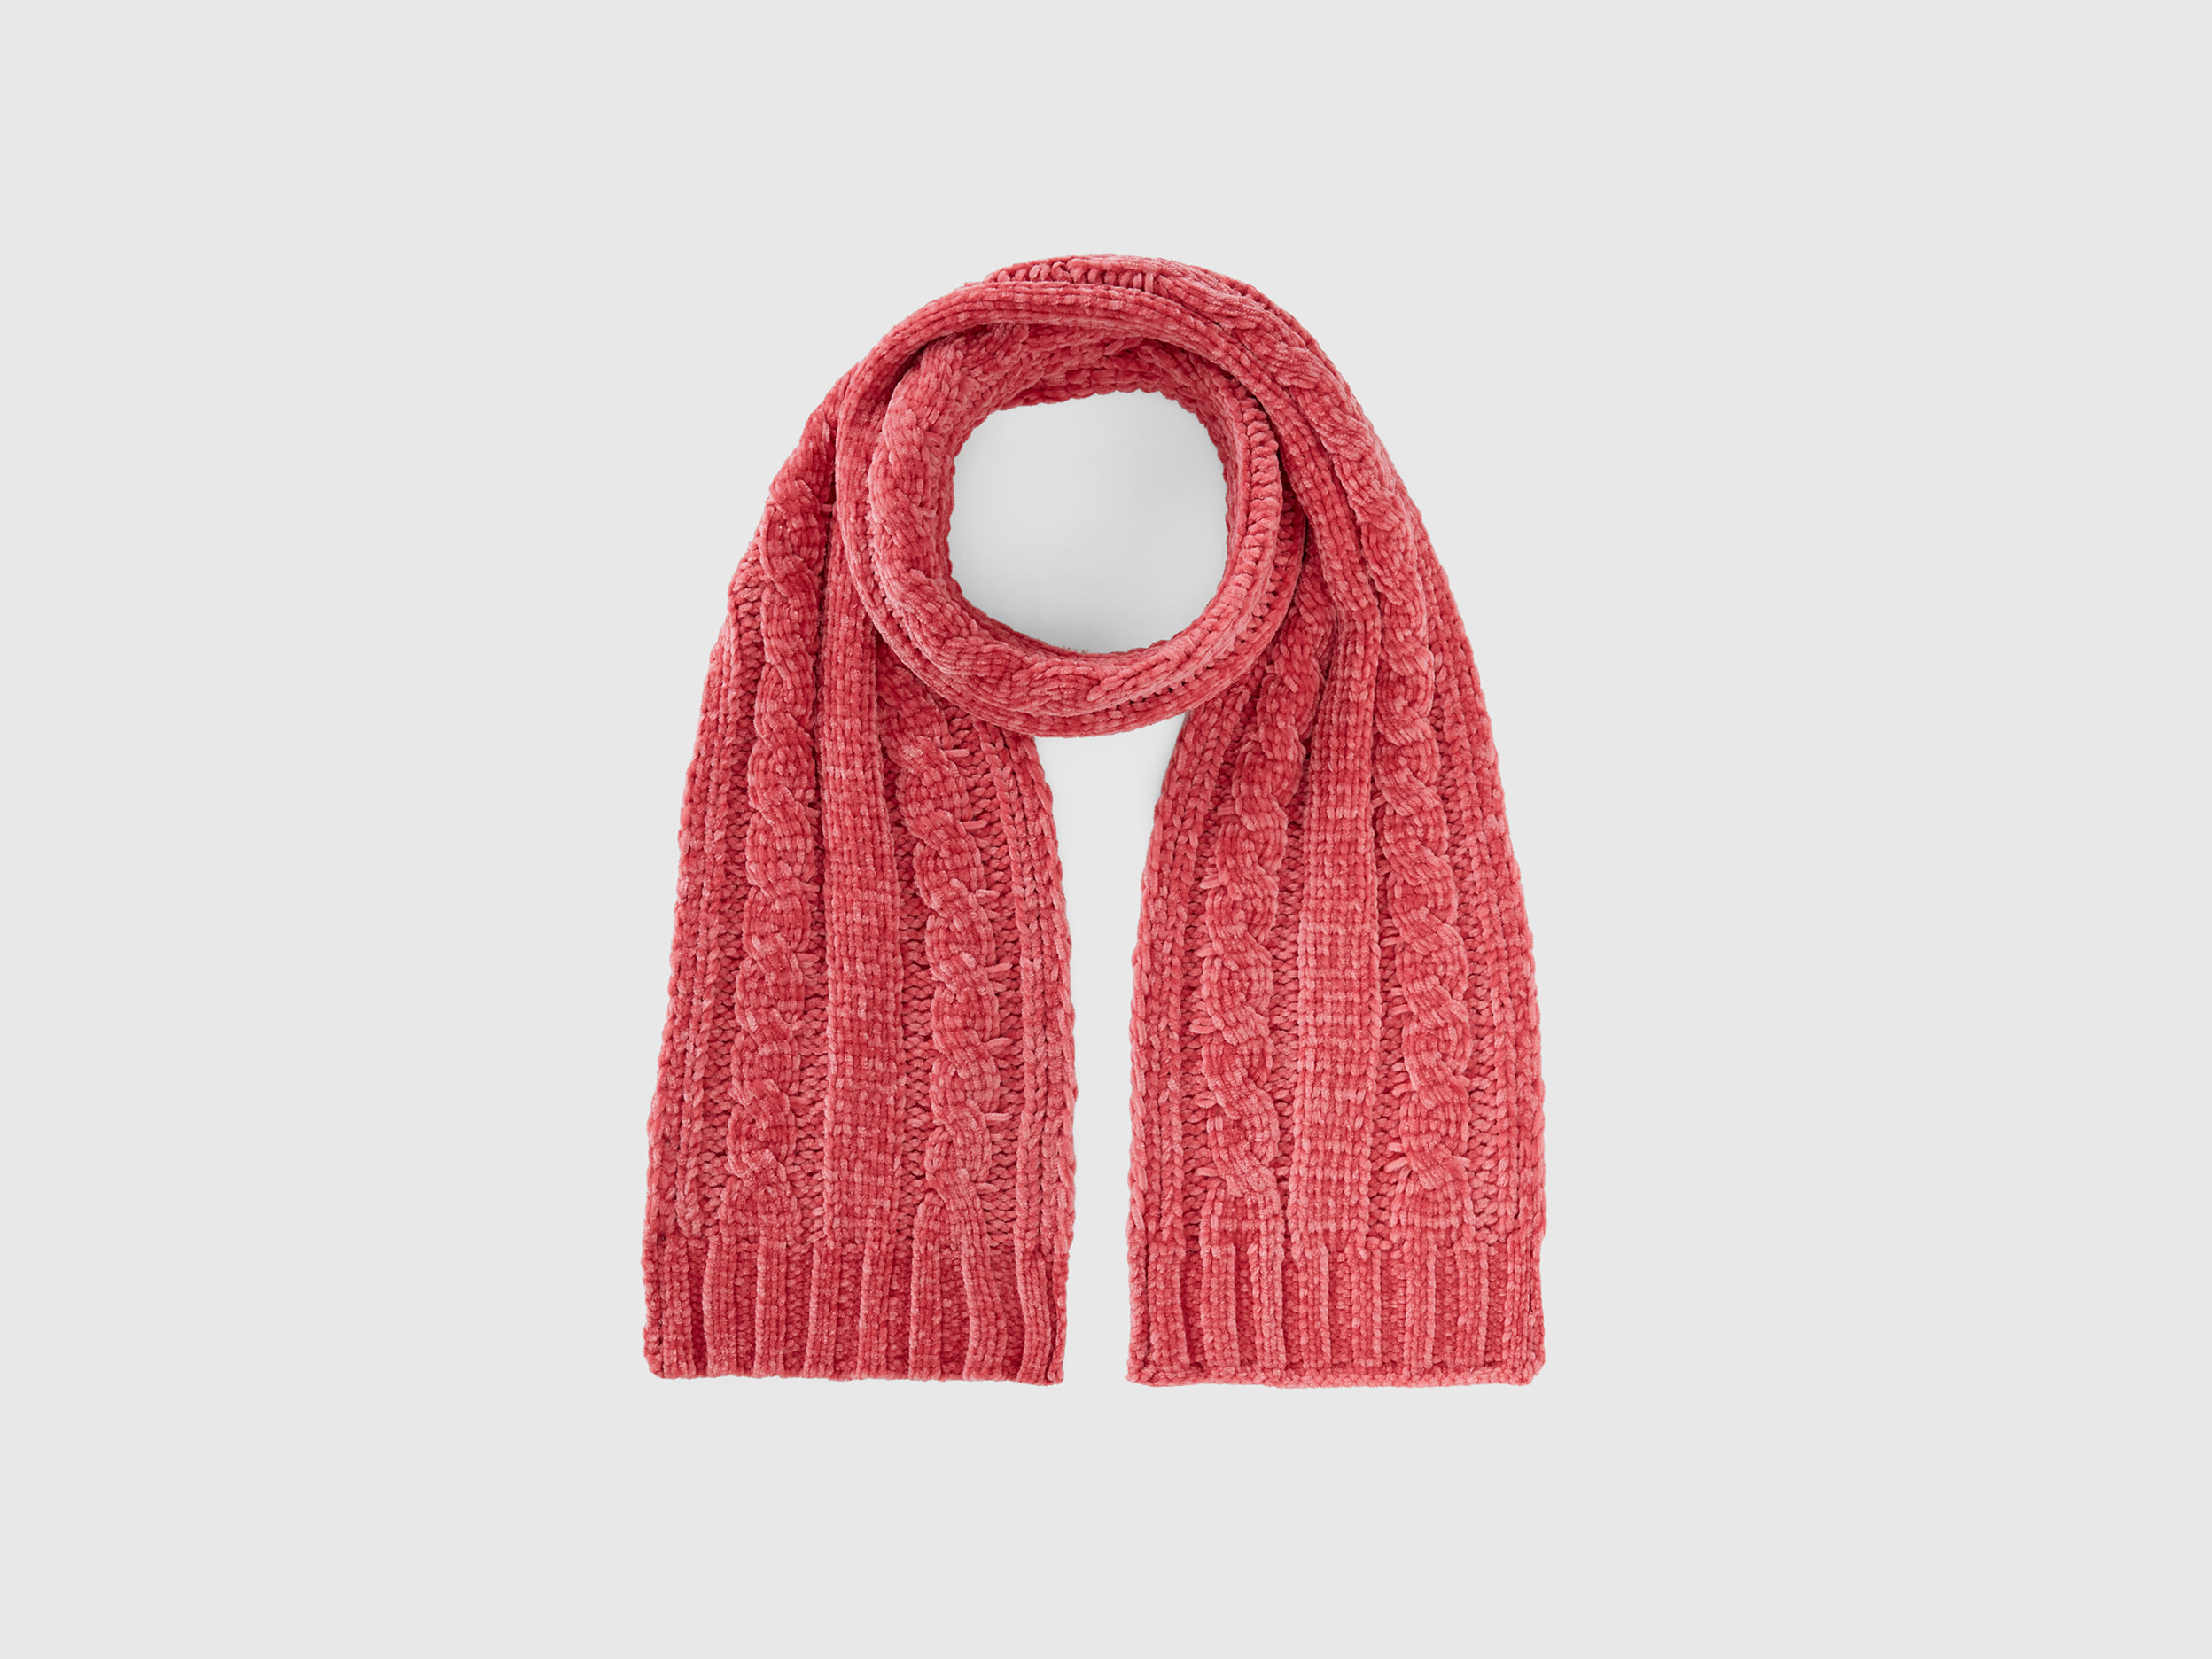 Benetton, Chenille Scarf With Cable Knit, size 4-6, Pink, Kids